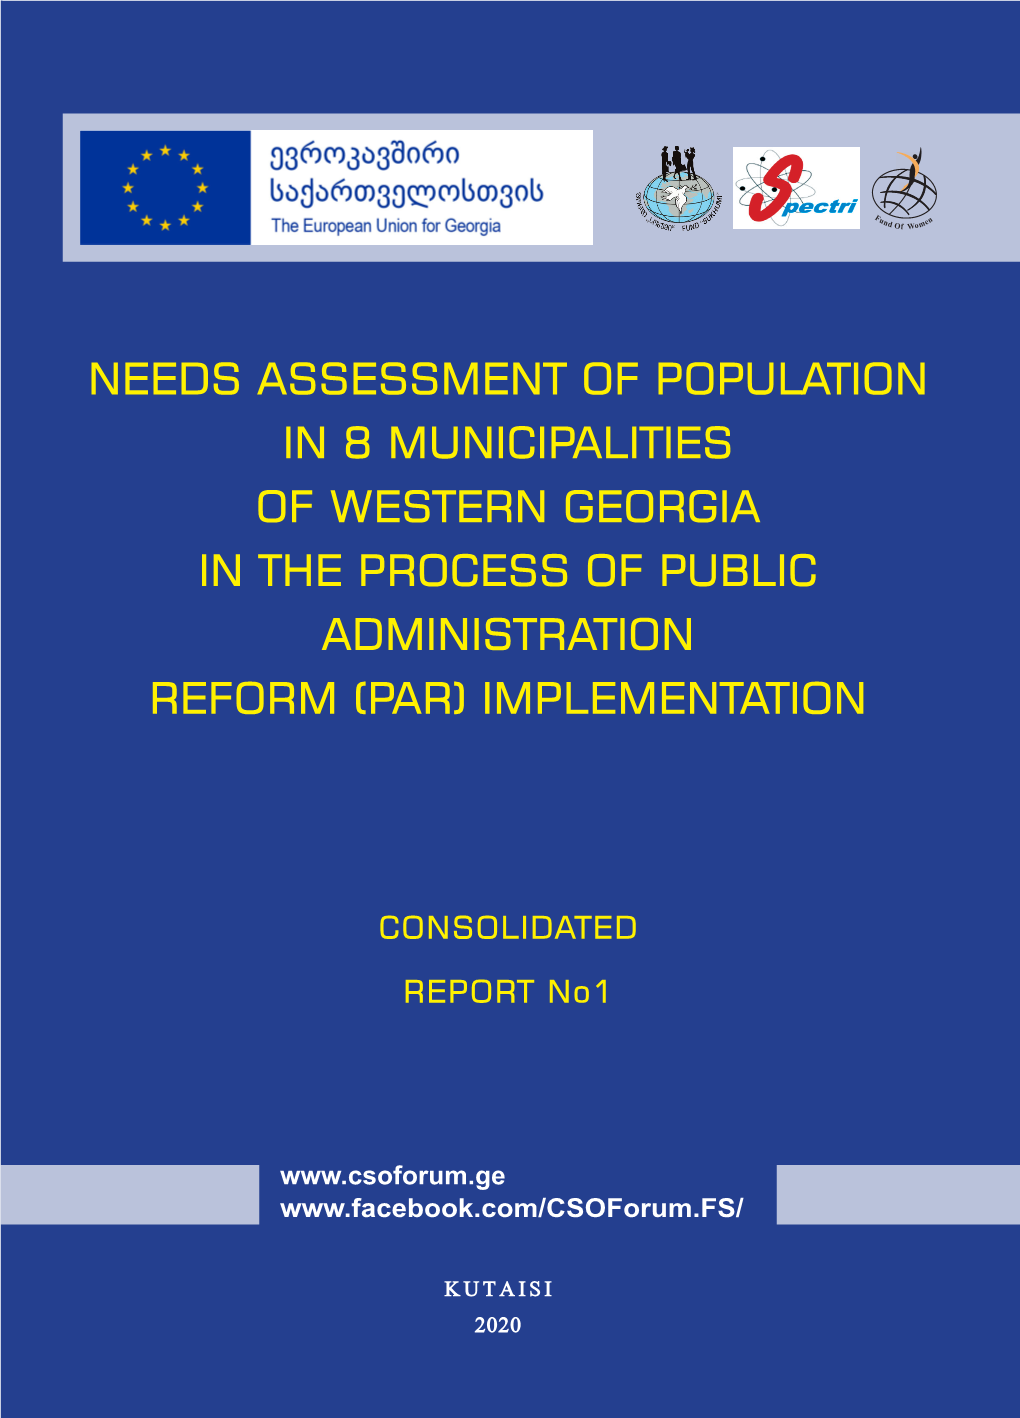 Needs Assessment of Population in 8 Municipalities of Western Georgia in the Process of Public Administration Reform (Par) Implementation